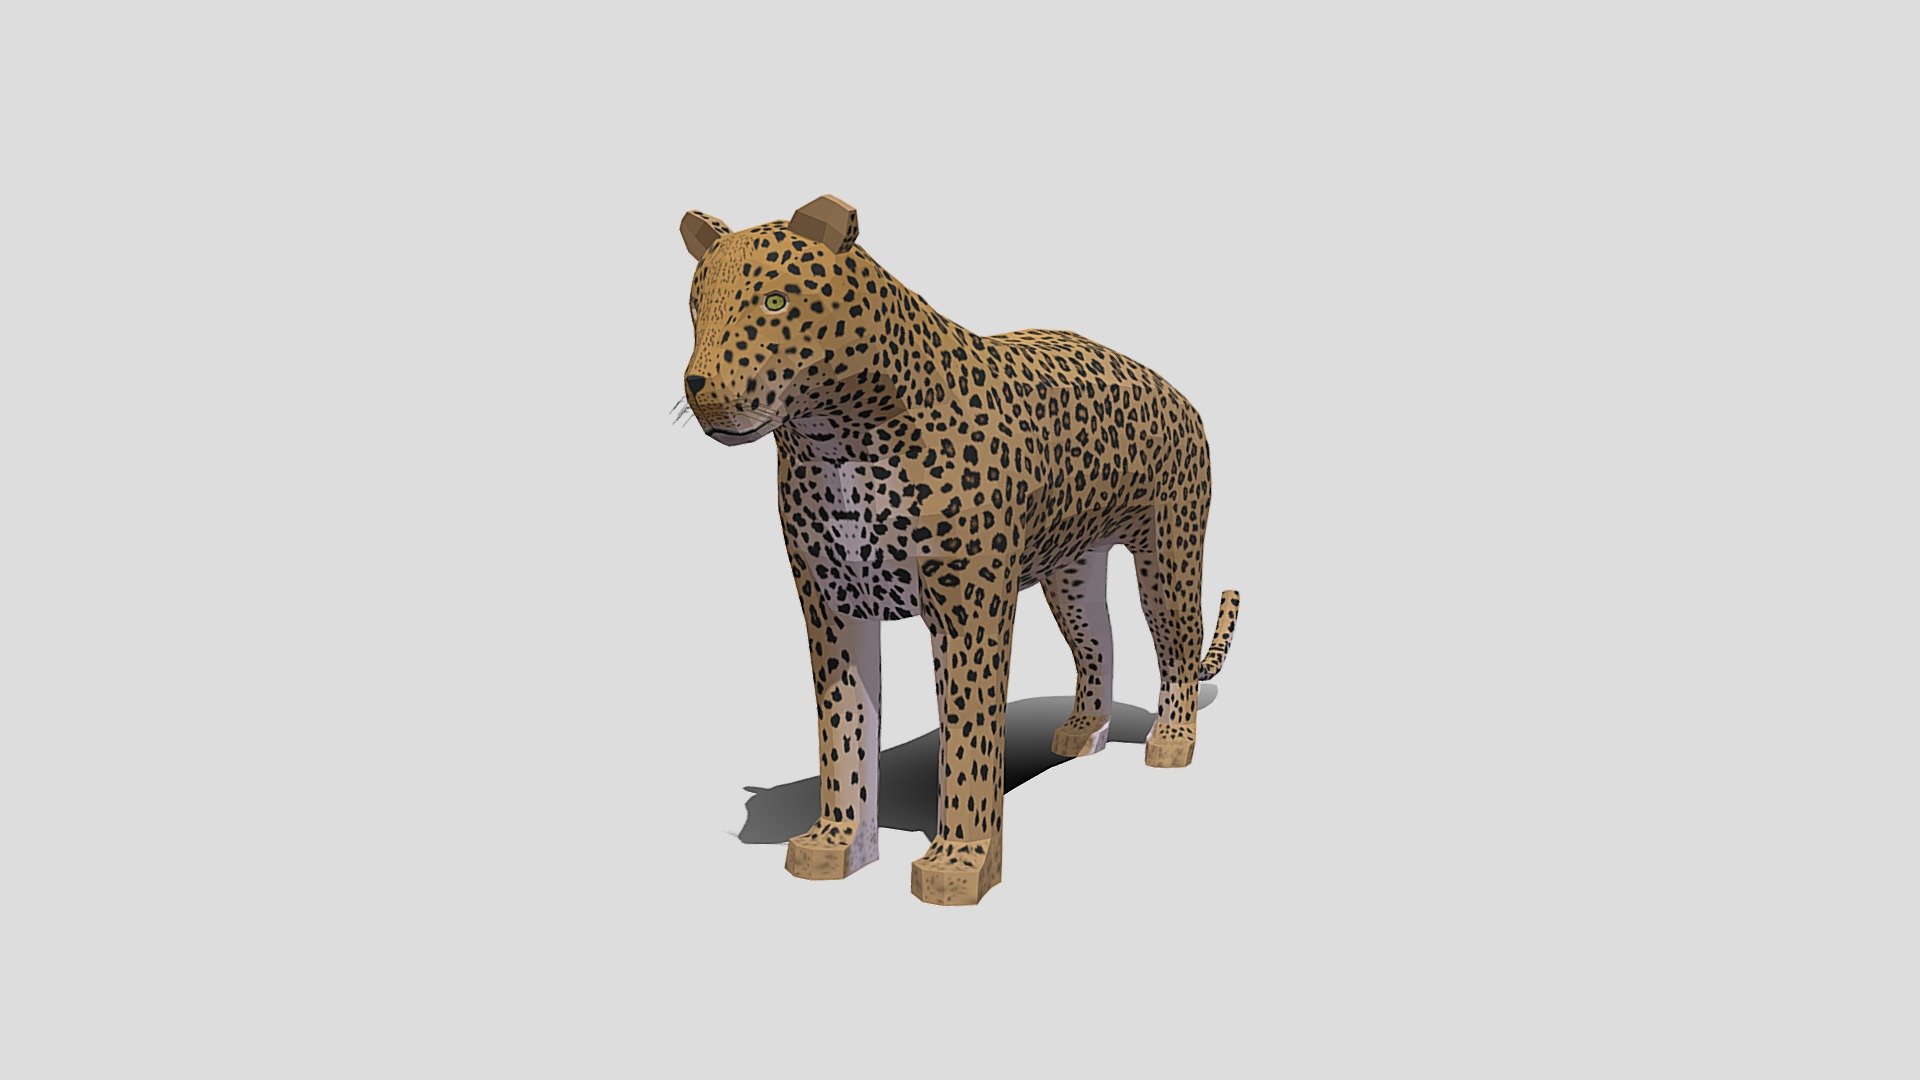 This is a low poly 3d model of a leopard. The low poly leopard was modeled and prepared for low-poly style renderings, background, general CG visualization presented as a mesh with quads only.

Verts : 1.096 Faces: 1.066

Hand painted diffuse texture is included, UV unwrap and mapping is available

The original file was created in blender. You will receive a 3DS, OBJ, FBX, blend, DAE, STL.

Warning: Depending on which software package you are using, the exchange formats (.obj, .3ds, .dae .fbx) may not match the preview images exactly. Due to the nature of these formats, there may be some textures that have to be loaded by hand and possibly triangulated geometry.

All preview images were rendered with Blender Cycles. Product is ready to render out-of-the-box. Please note that the lights, cameras, and background is only included in the .blend file. The model is clean and alone in the other provided files, centered at origin and has real-world scale 3d model